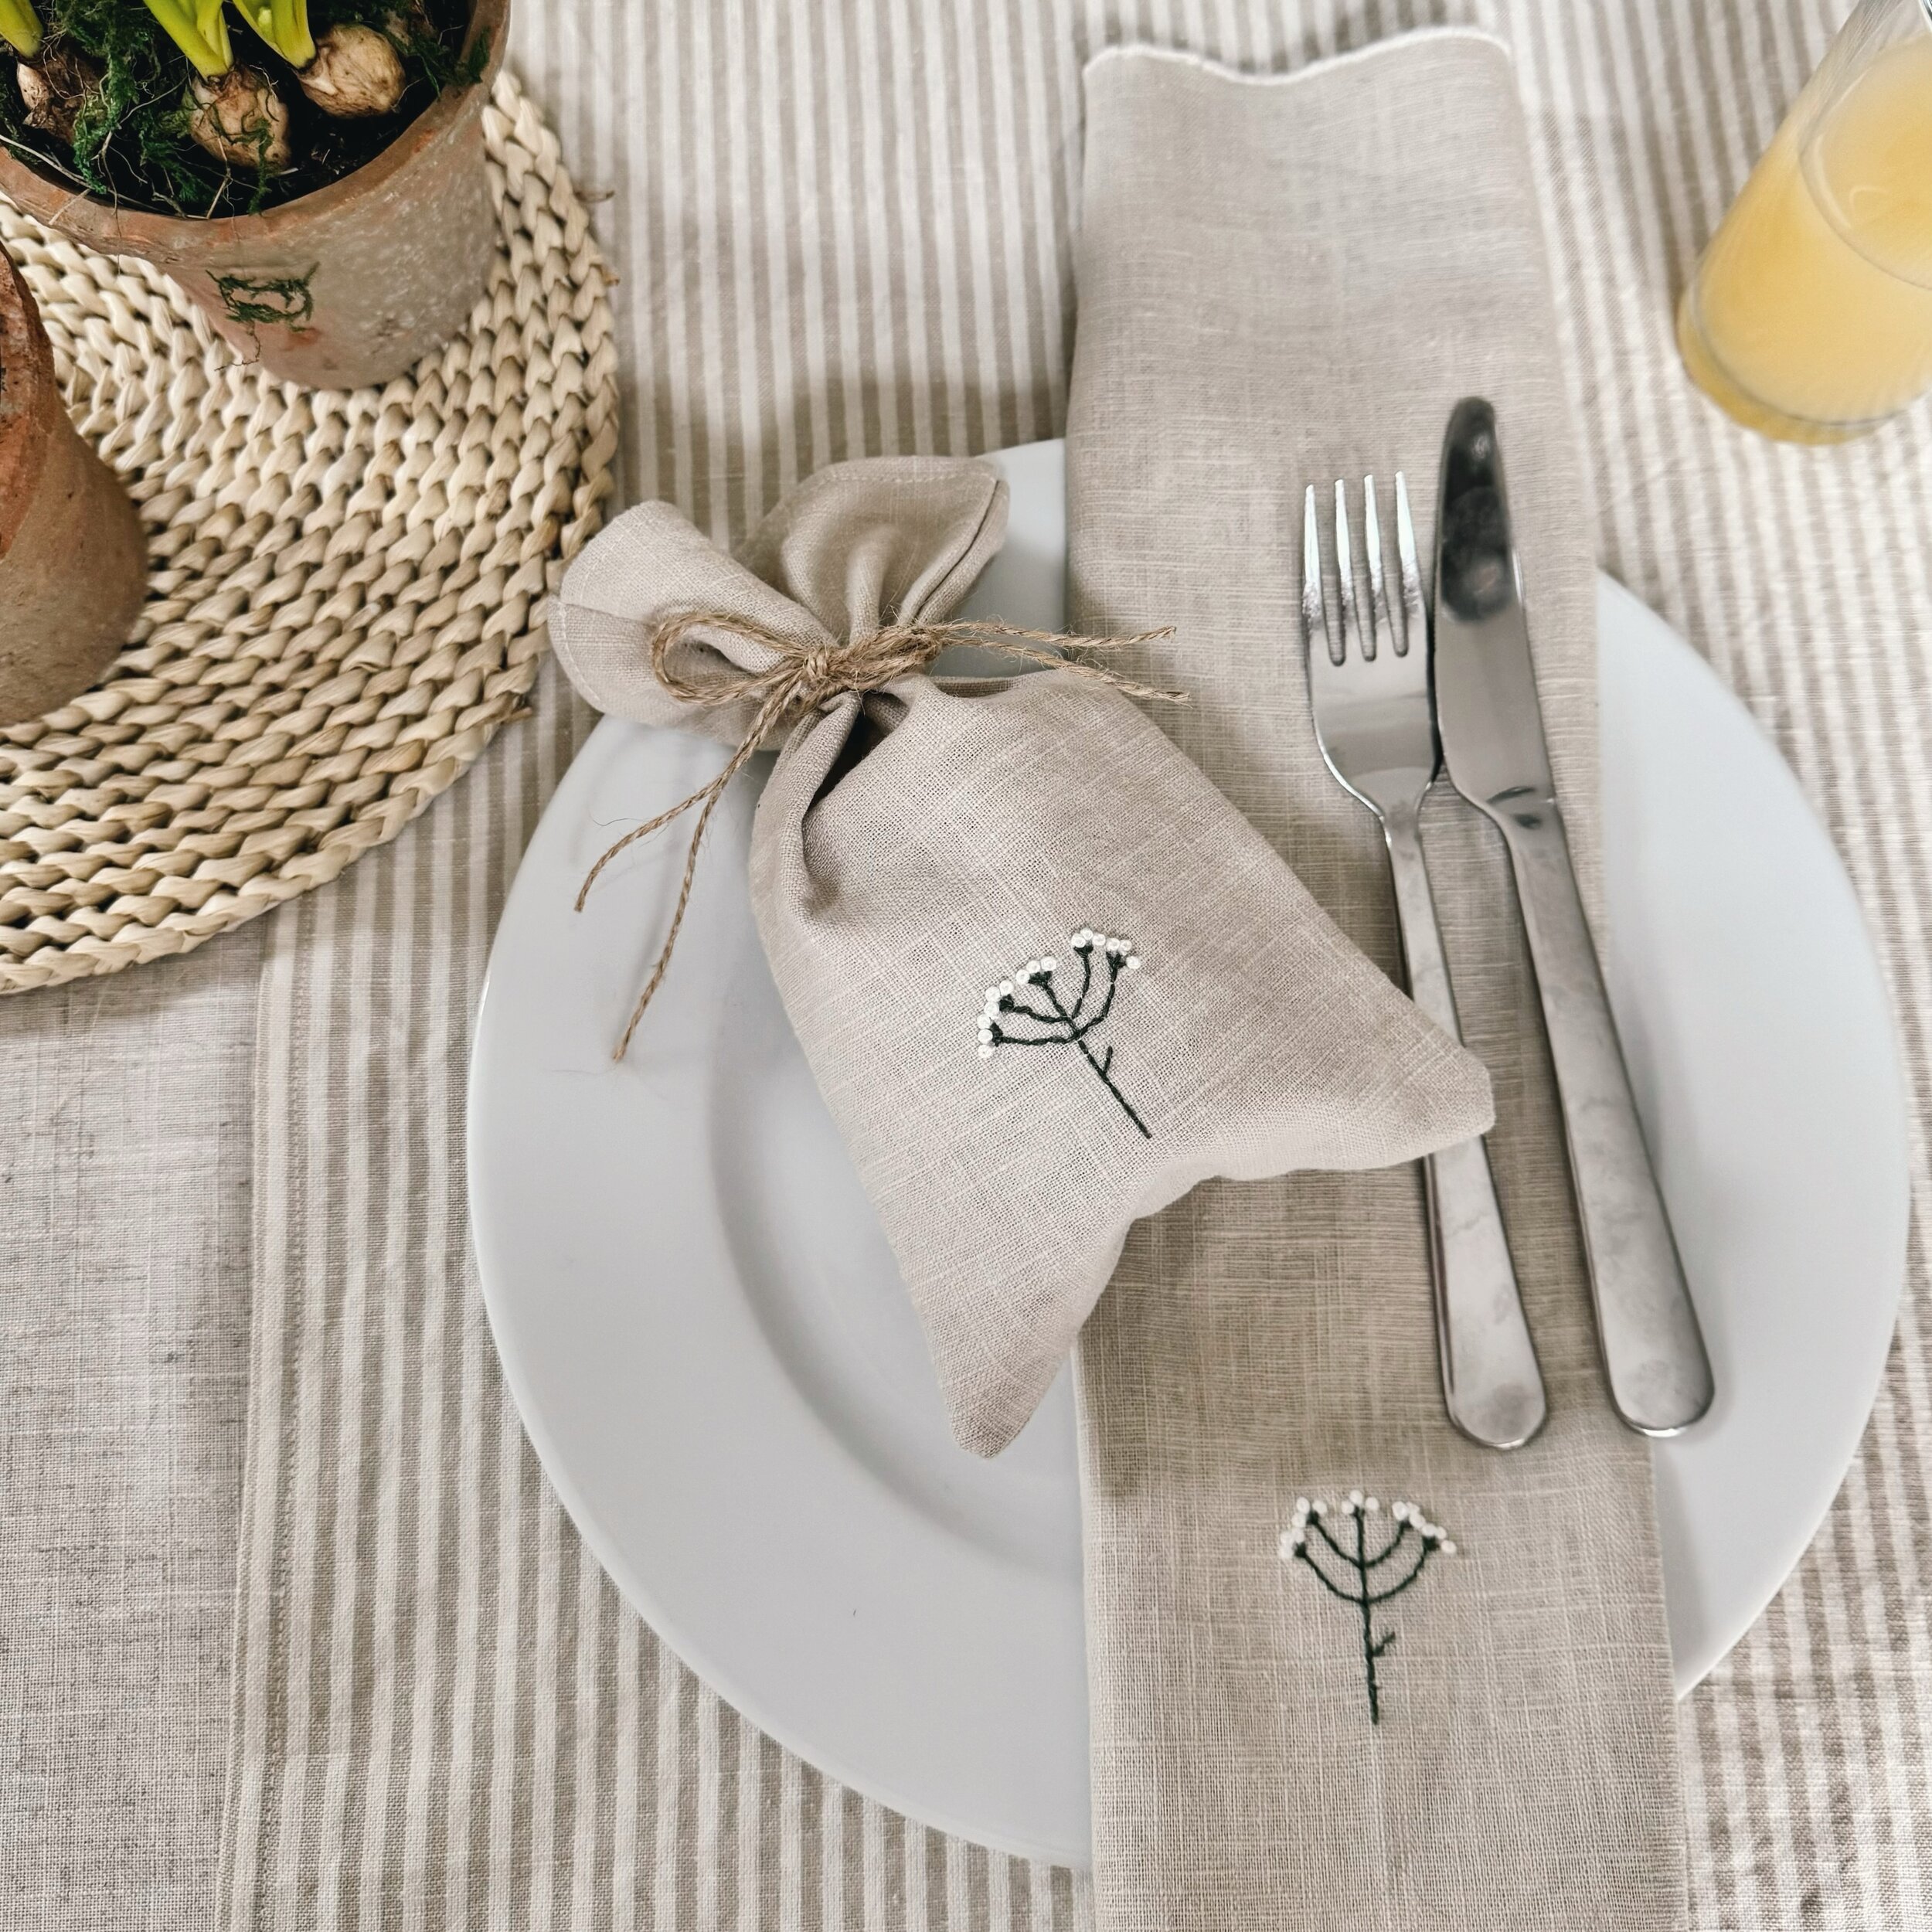 Who has spotted our embroidered cow parsley napkins? A beautiful addition for spring summer 🌱 #tablelinens #napkins #embroiderednapkins #stripetablerunner